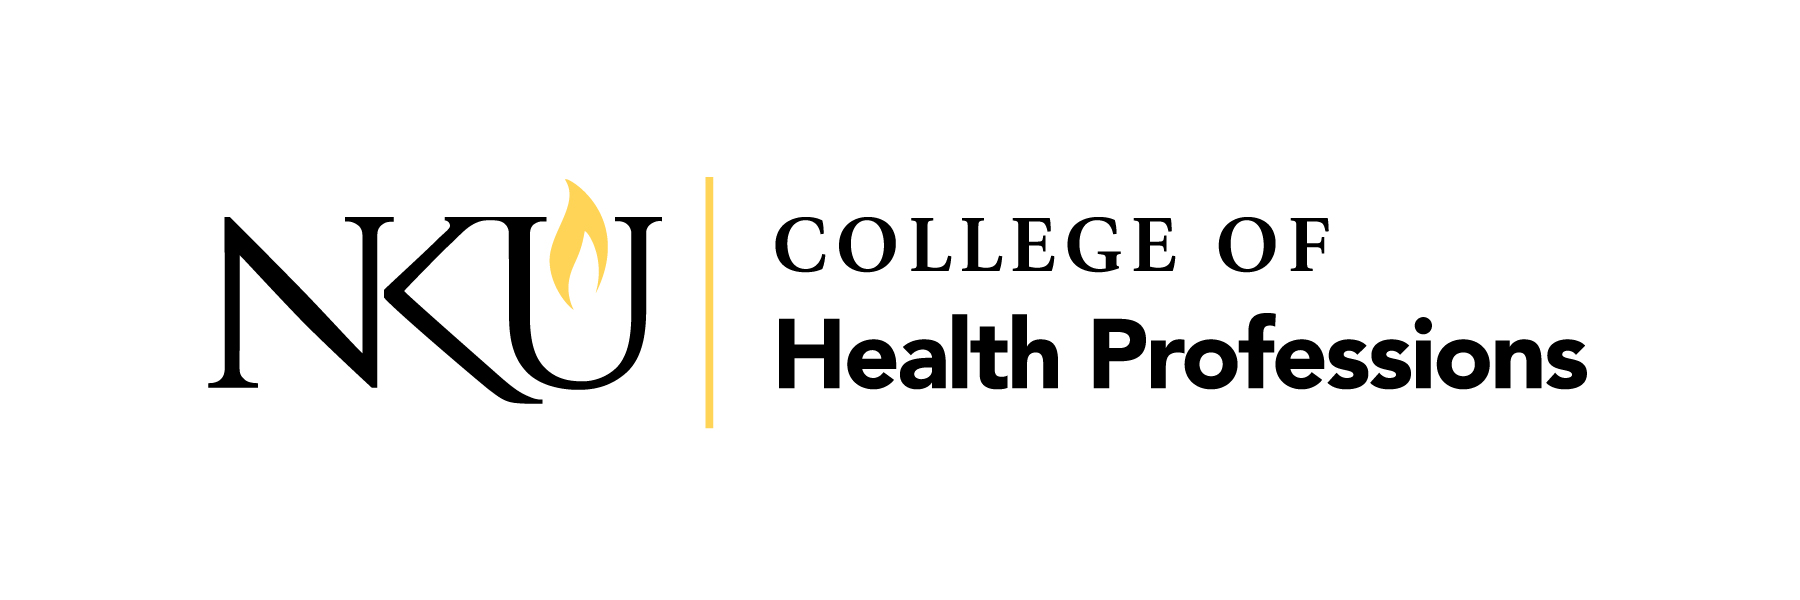 Northern Kentucky University - College of Health Professions